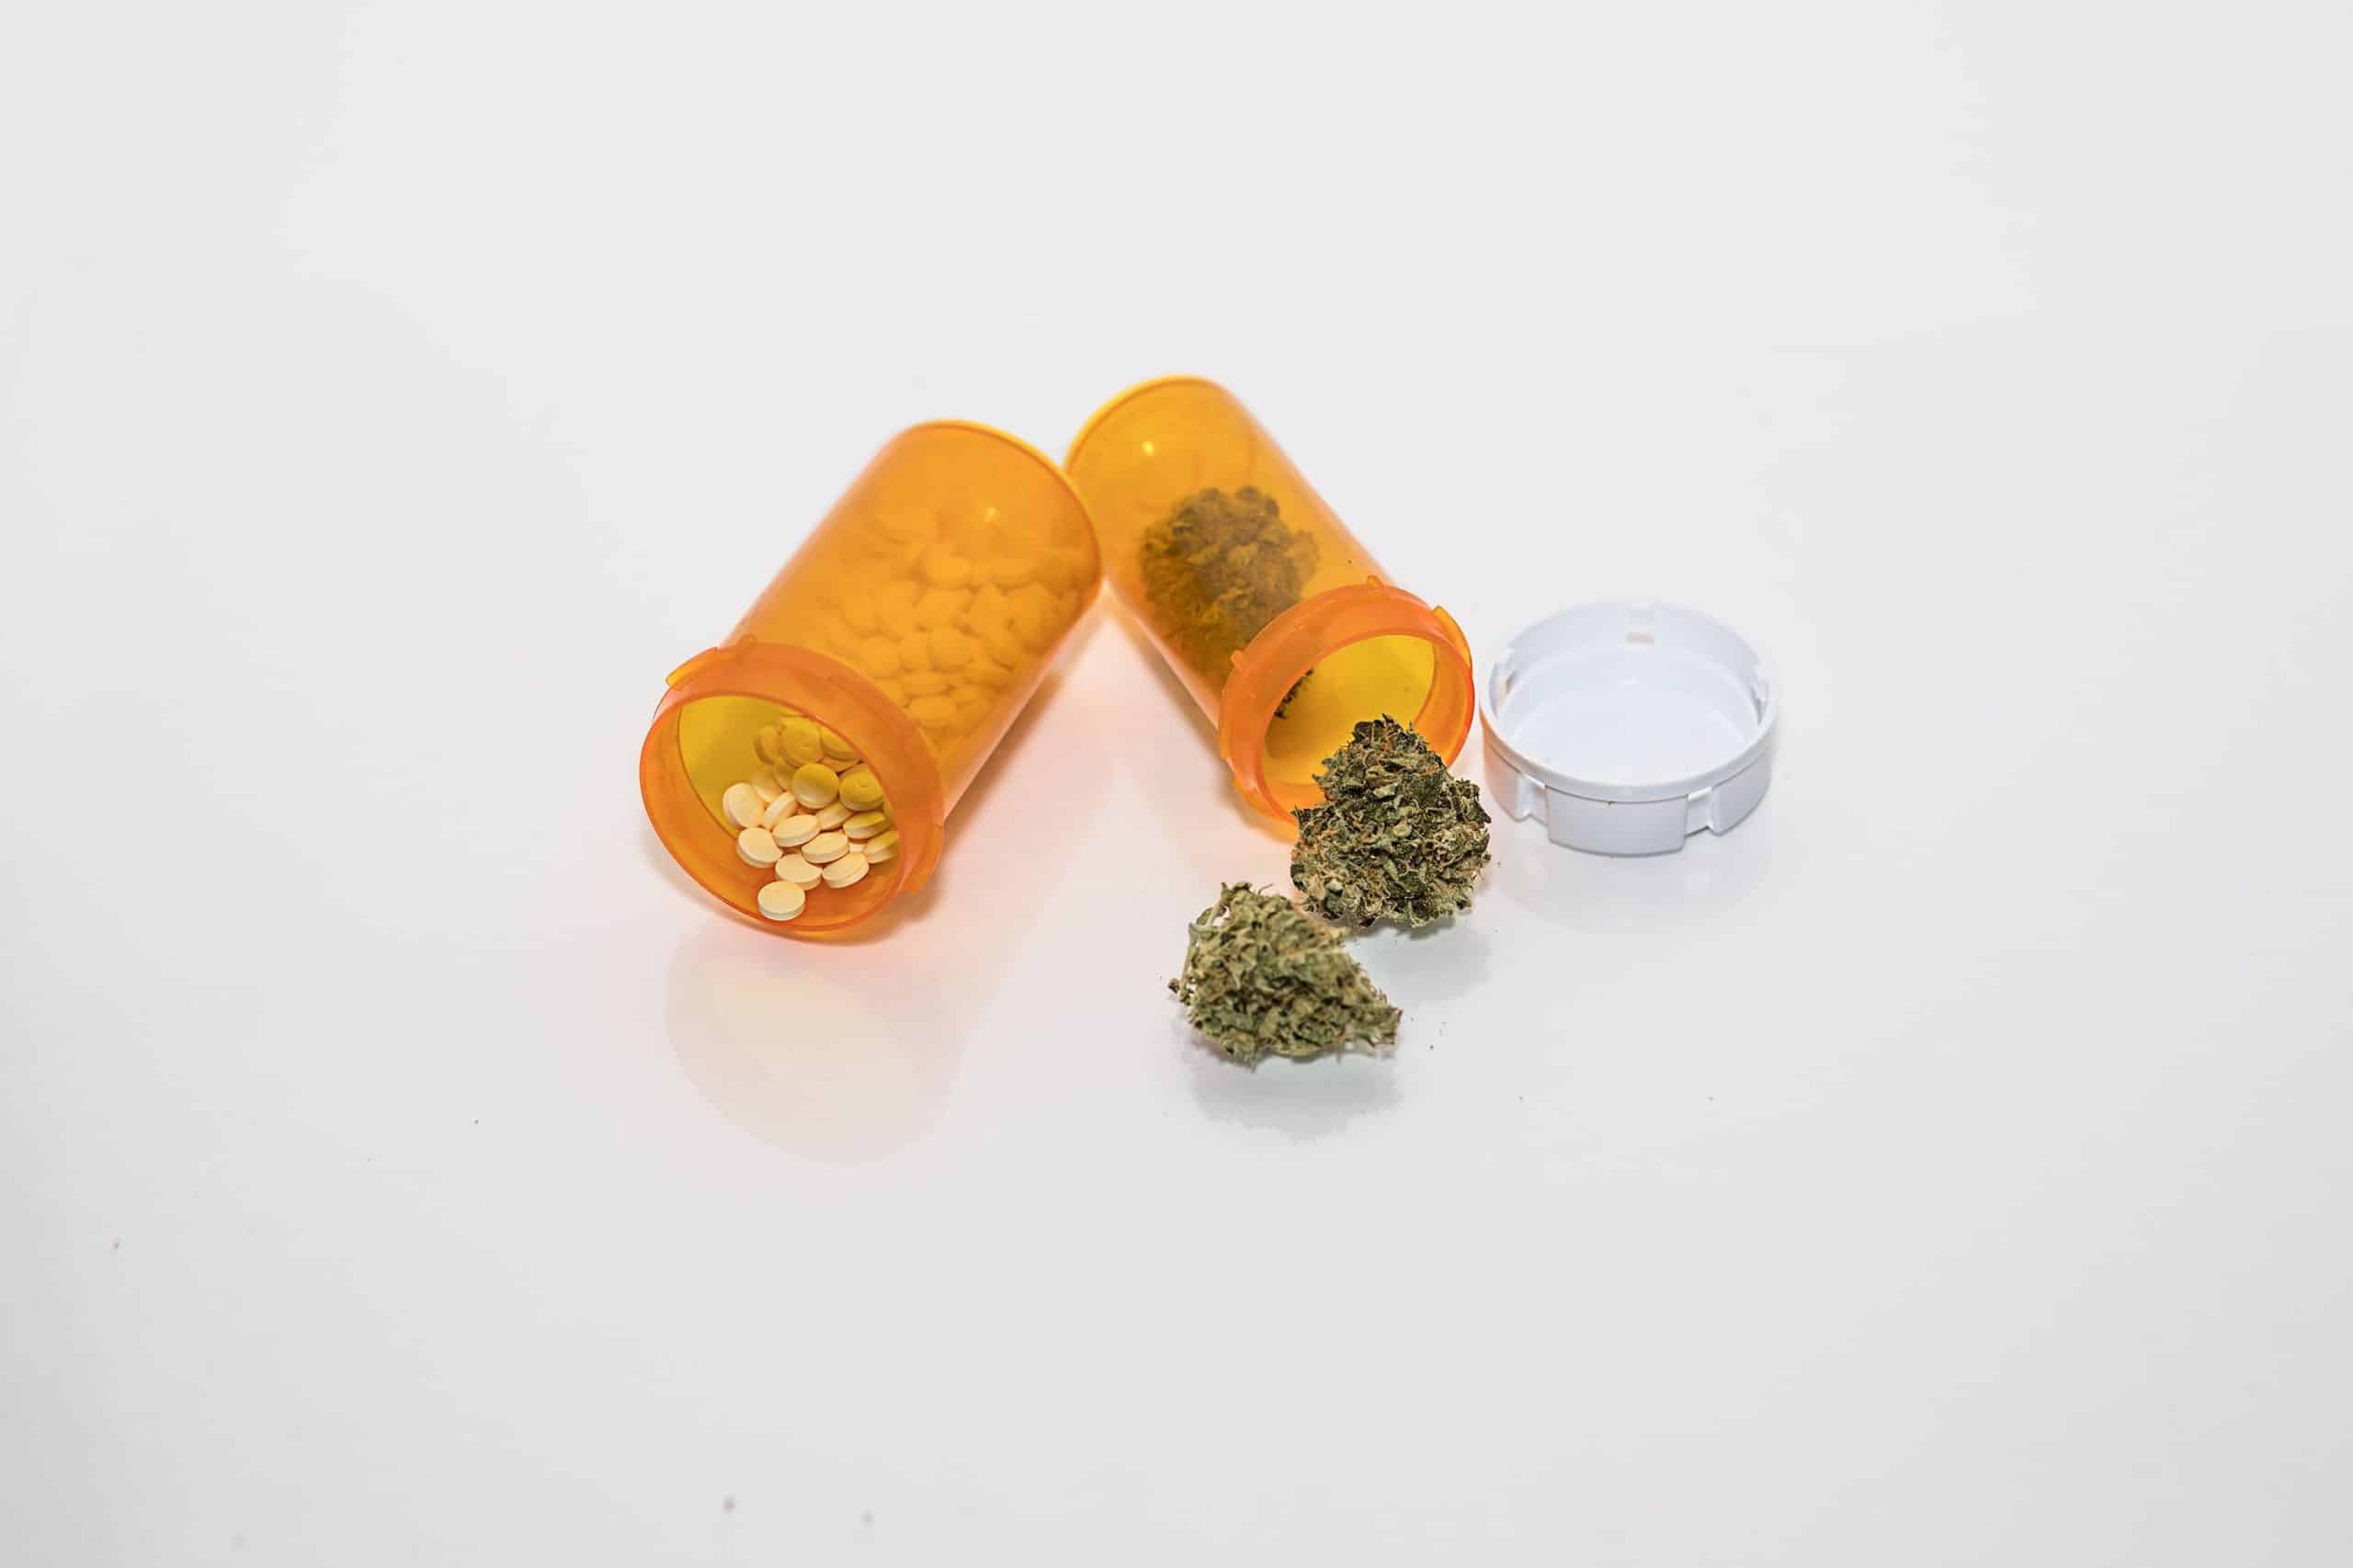 Study: Medical Cannabis Brought Down Opioid Use in 79%